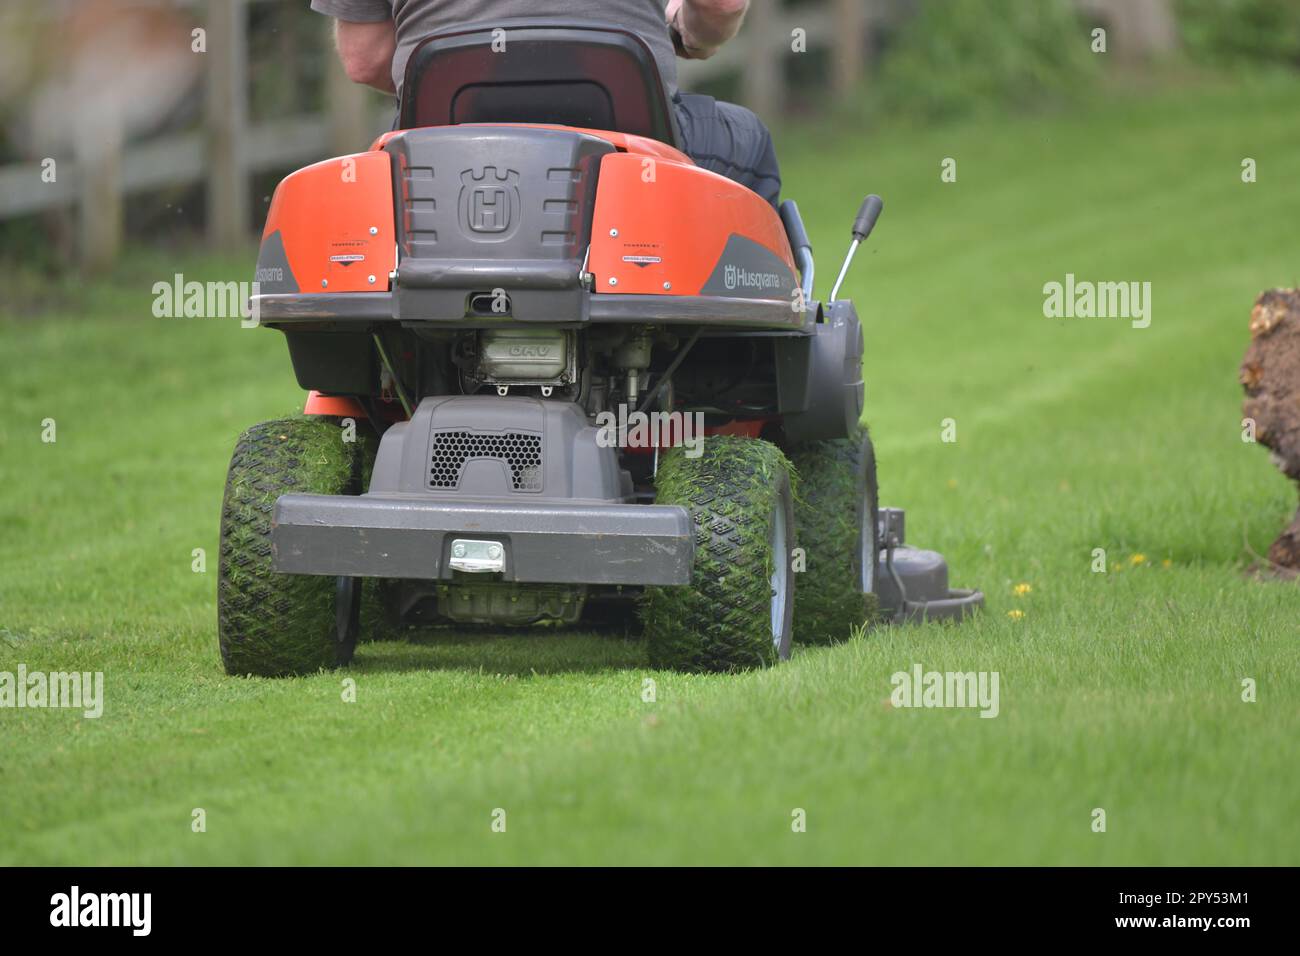 A man mowing a lawn on a ride on mower on a spring day Stock Photo